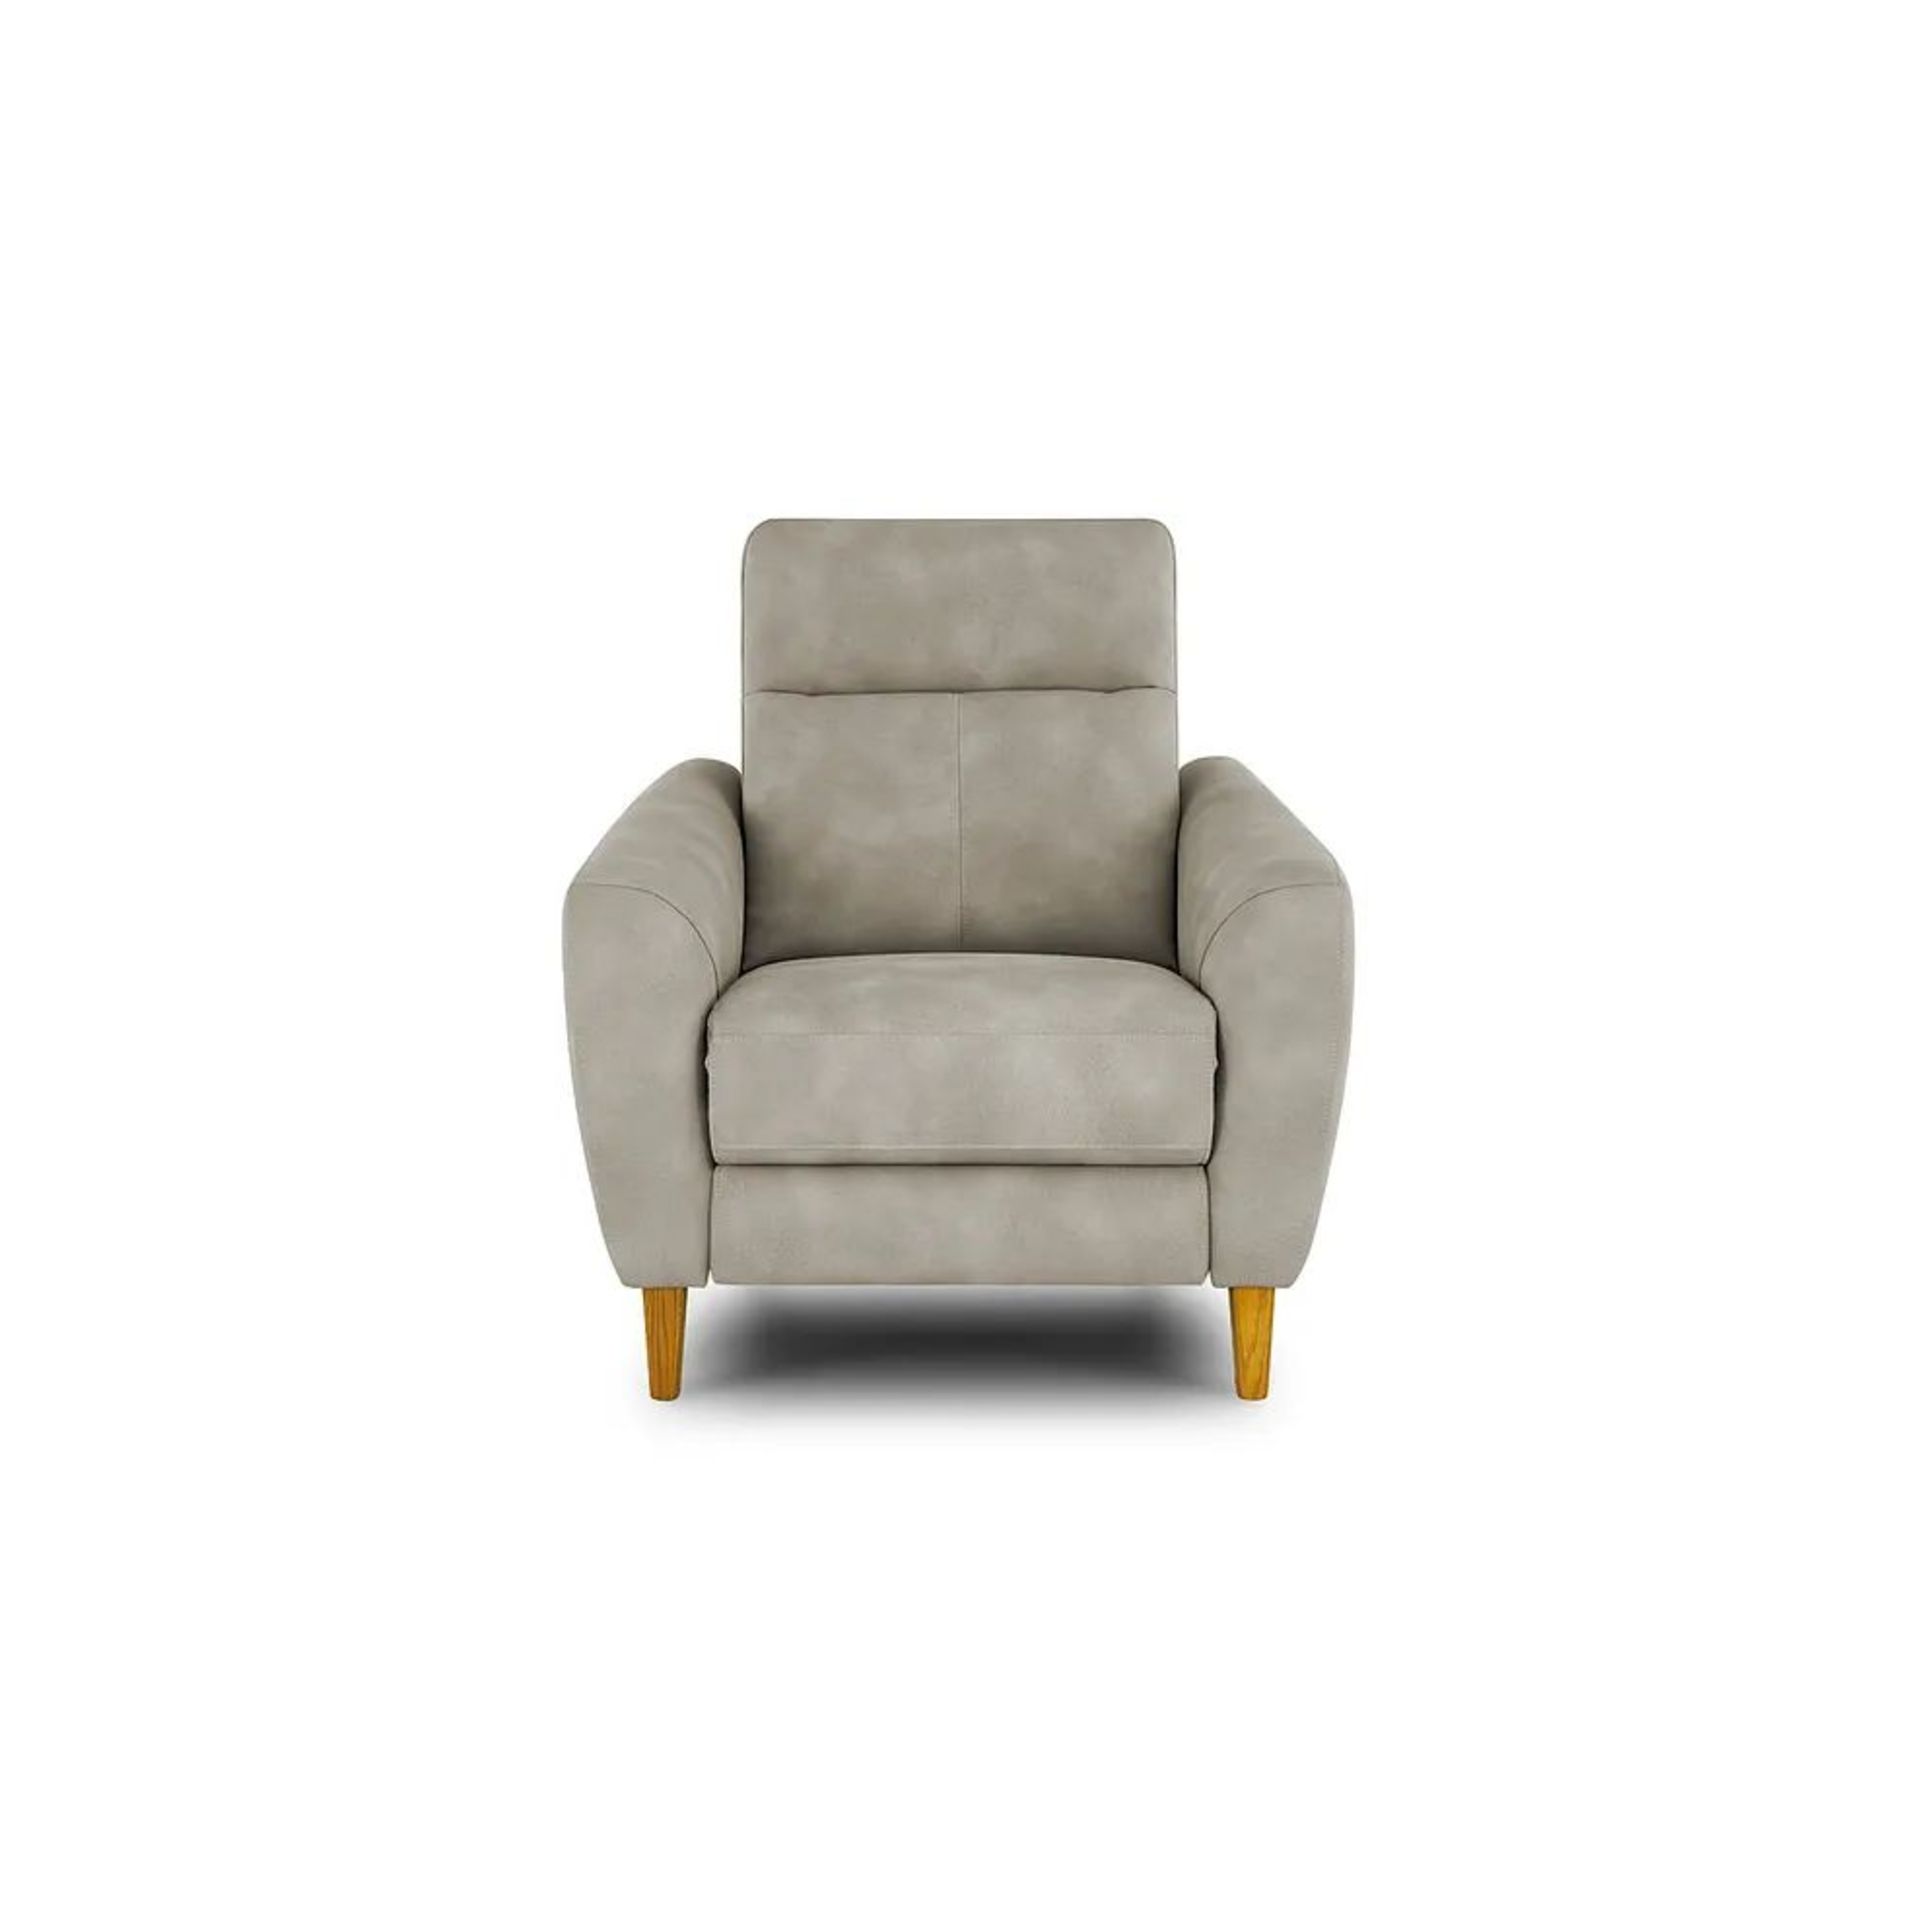 BRAND NEW DYLAN Static Armchair - OXFORD BEIGE FABRIC. RRP £749. Our Dylan armchair, shown here in - Image 2 of 8